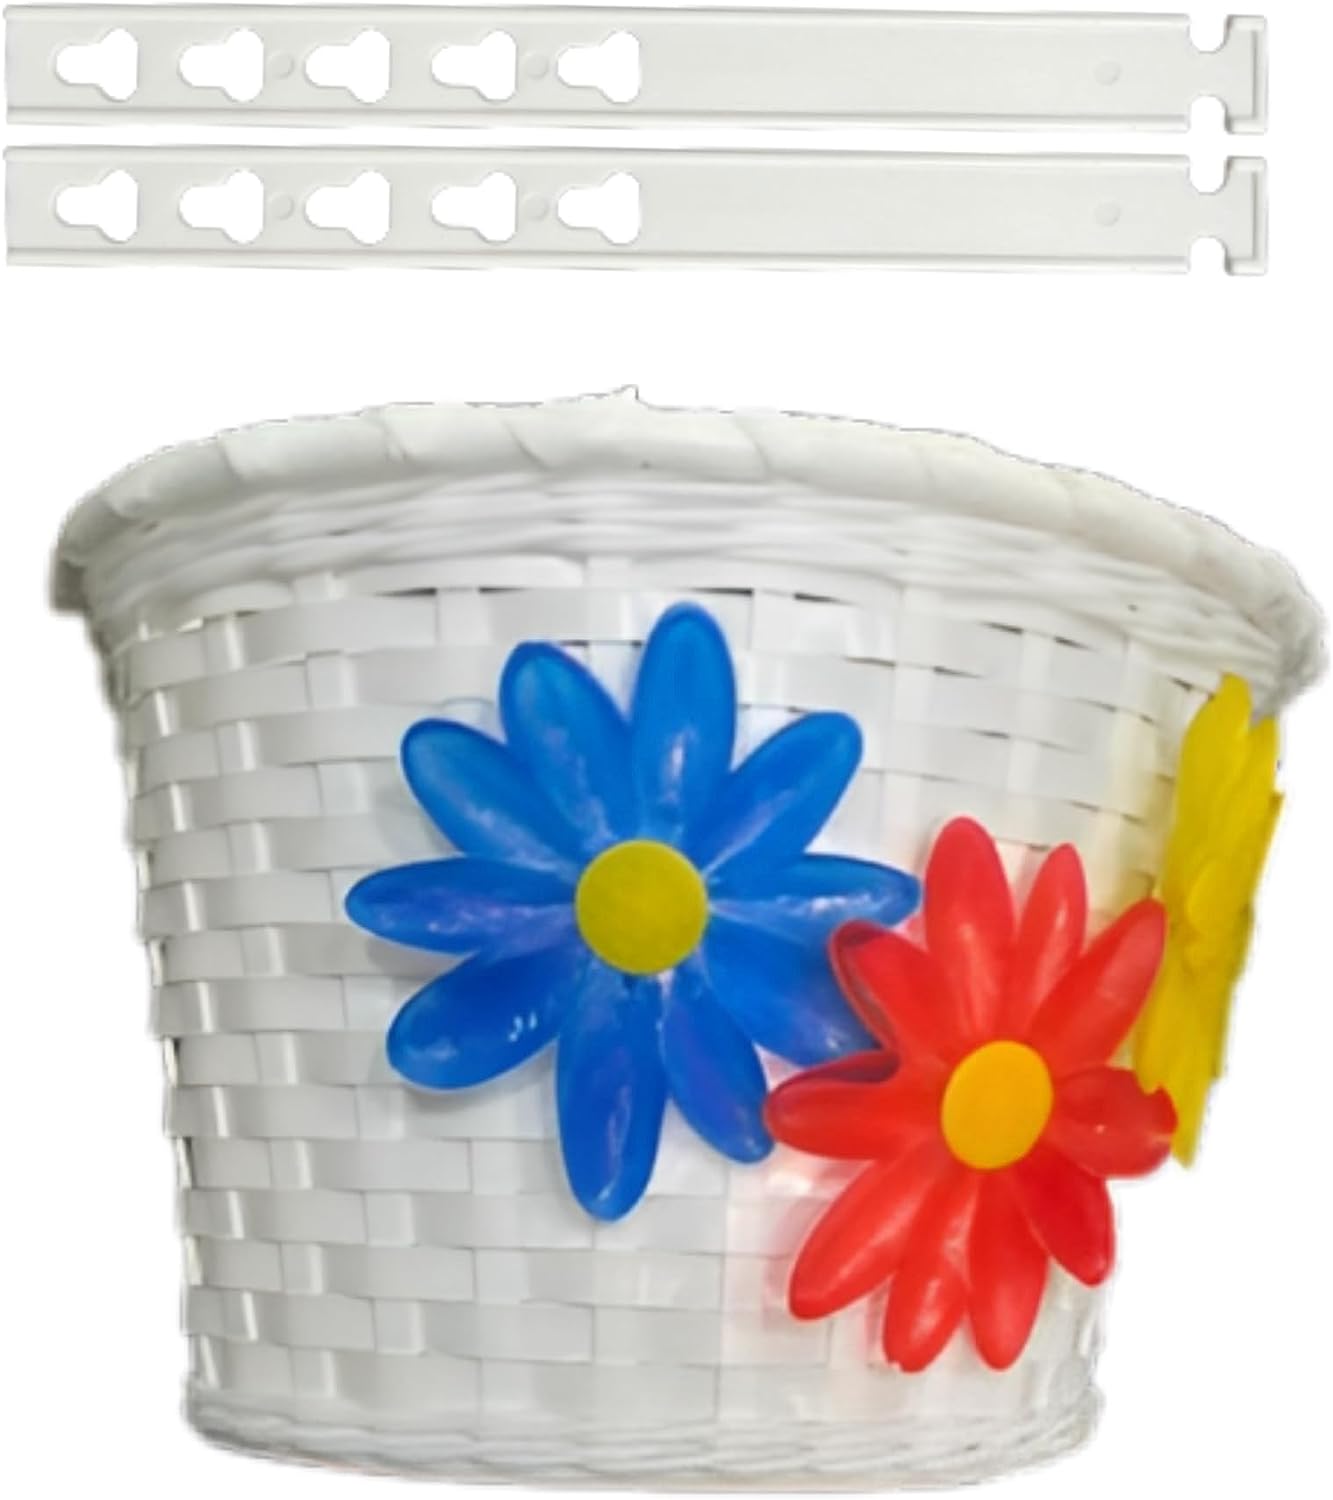 ULTRACYCLE Front Flower Bicycle Basket White Fits Standard Girl Bikes W/ Straps-Pit Crew Cycles